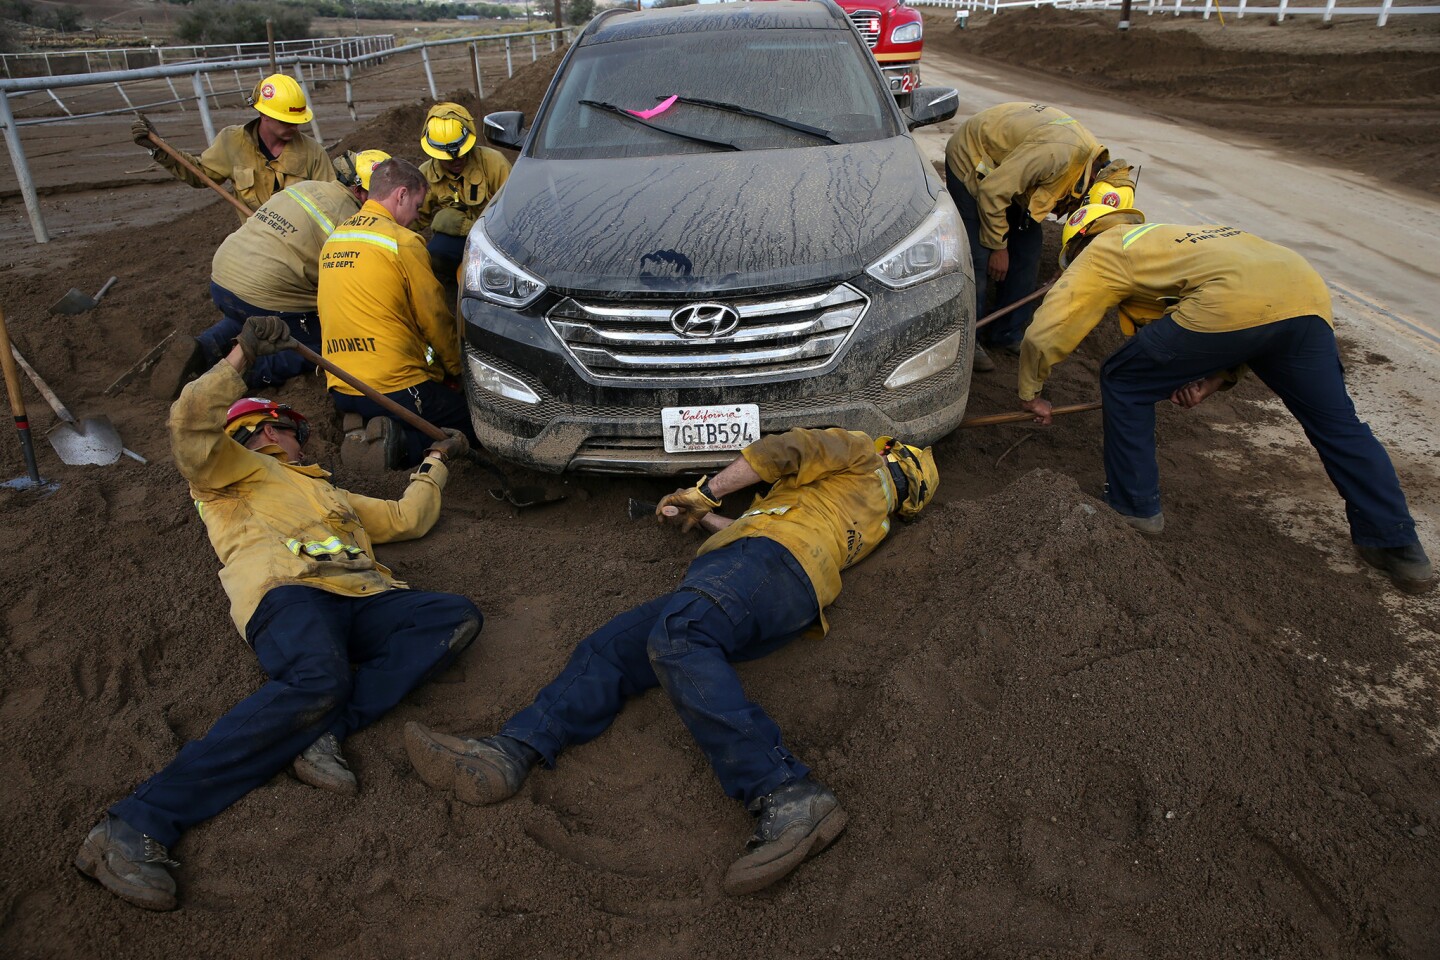 An L.A. County fire crew digs a car out of the mud covering Lake Elizabeth Road where its owner, Esther Shelton of Palmdale, abandoned it.